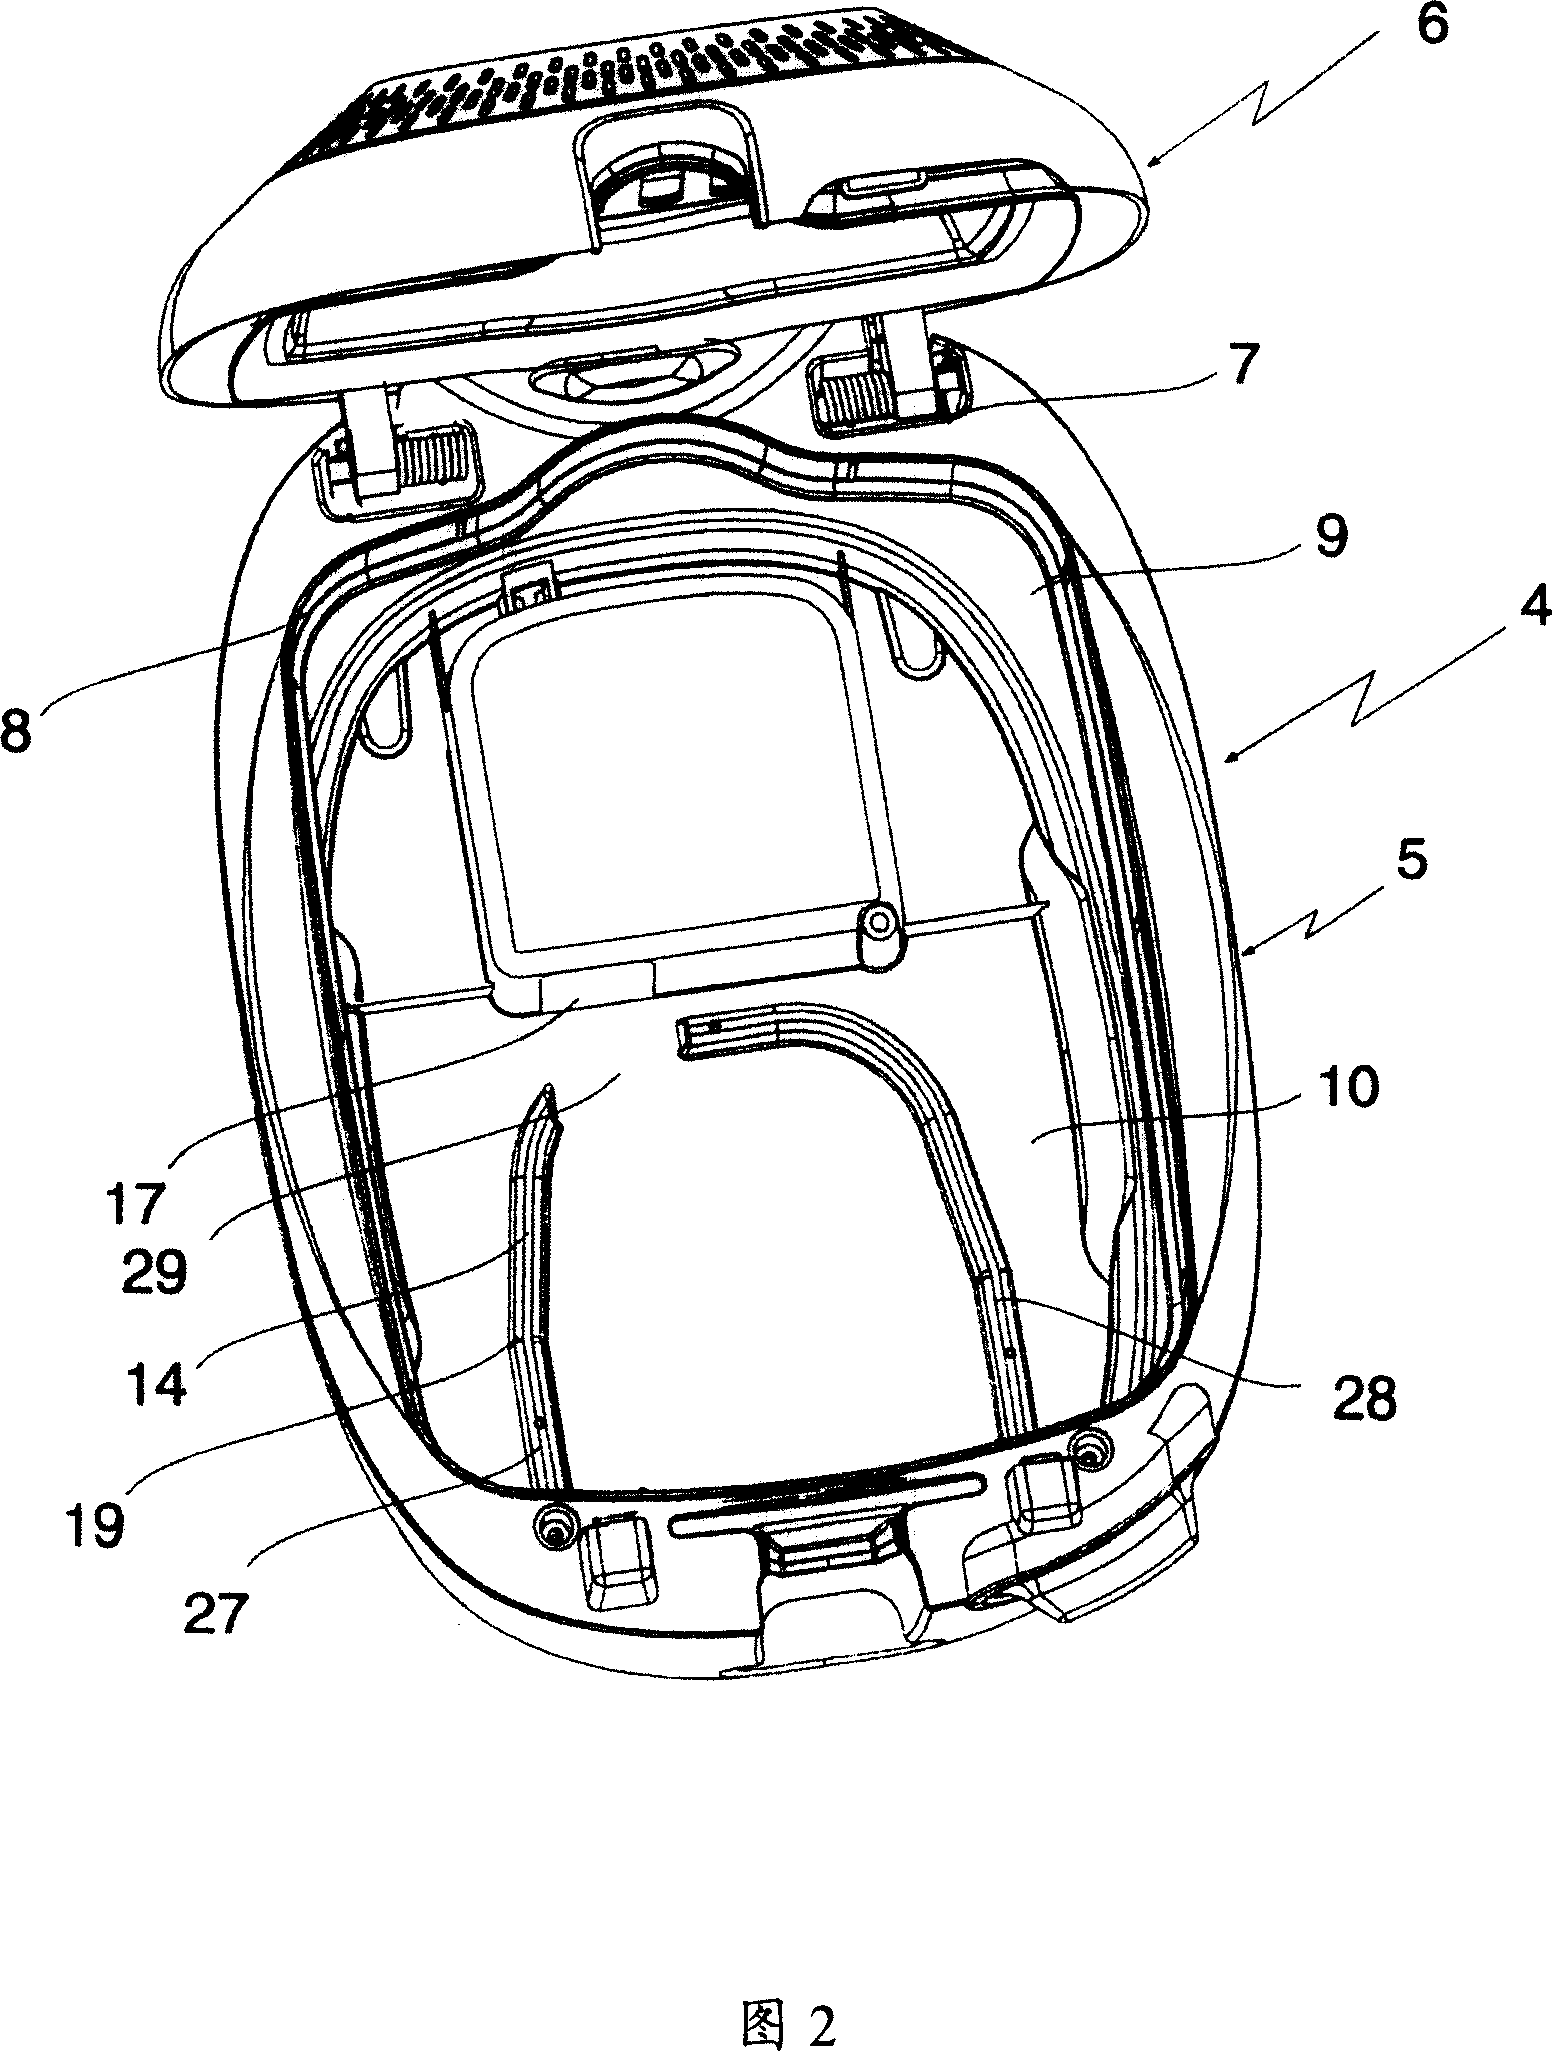 Cooking appliance comprising a simplified supply and control subassembly